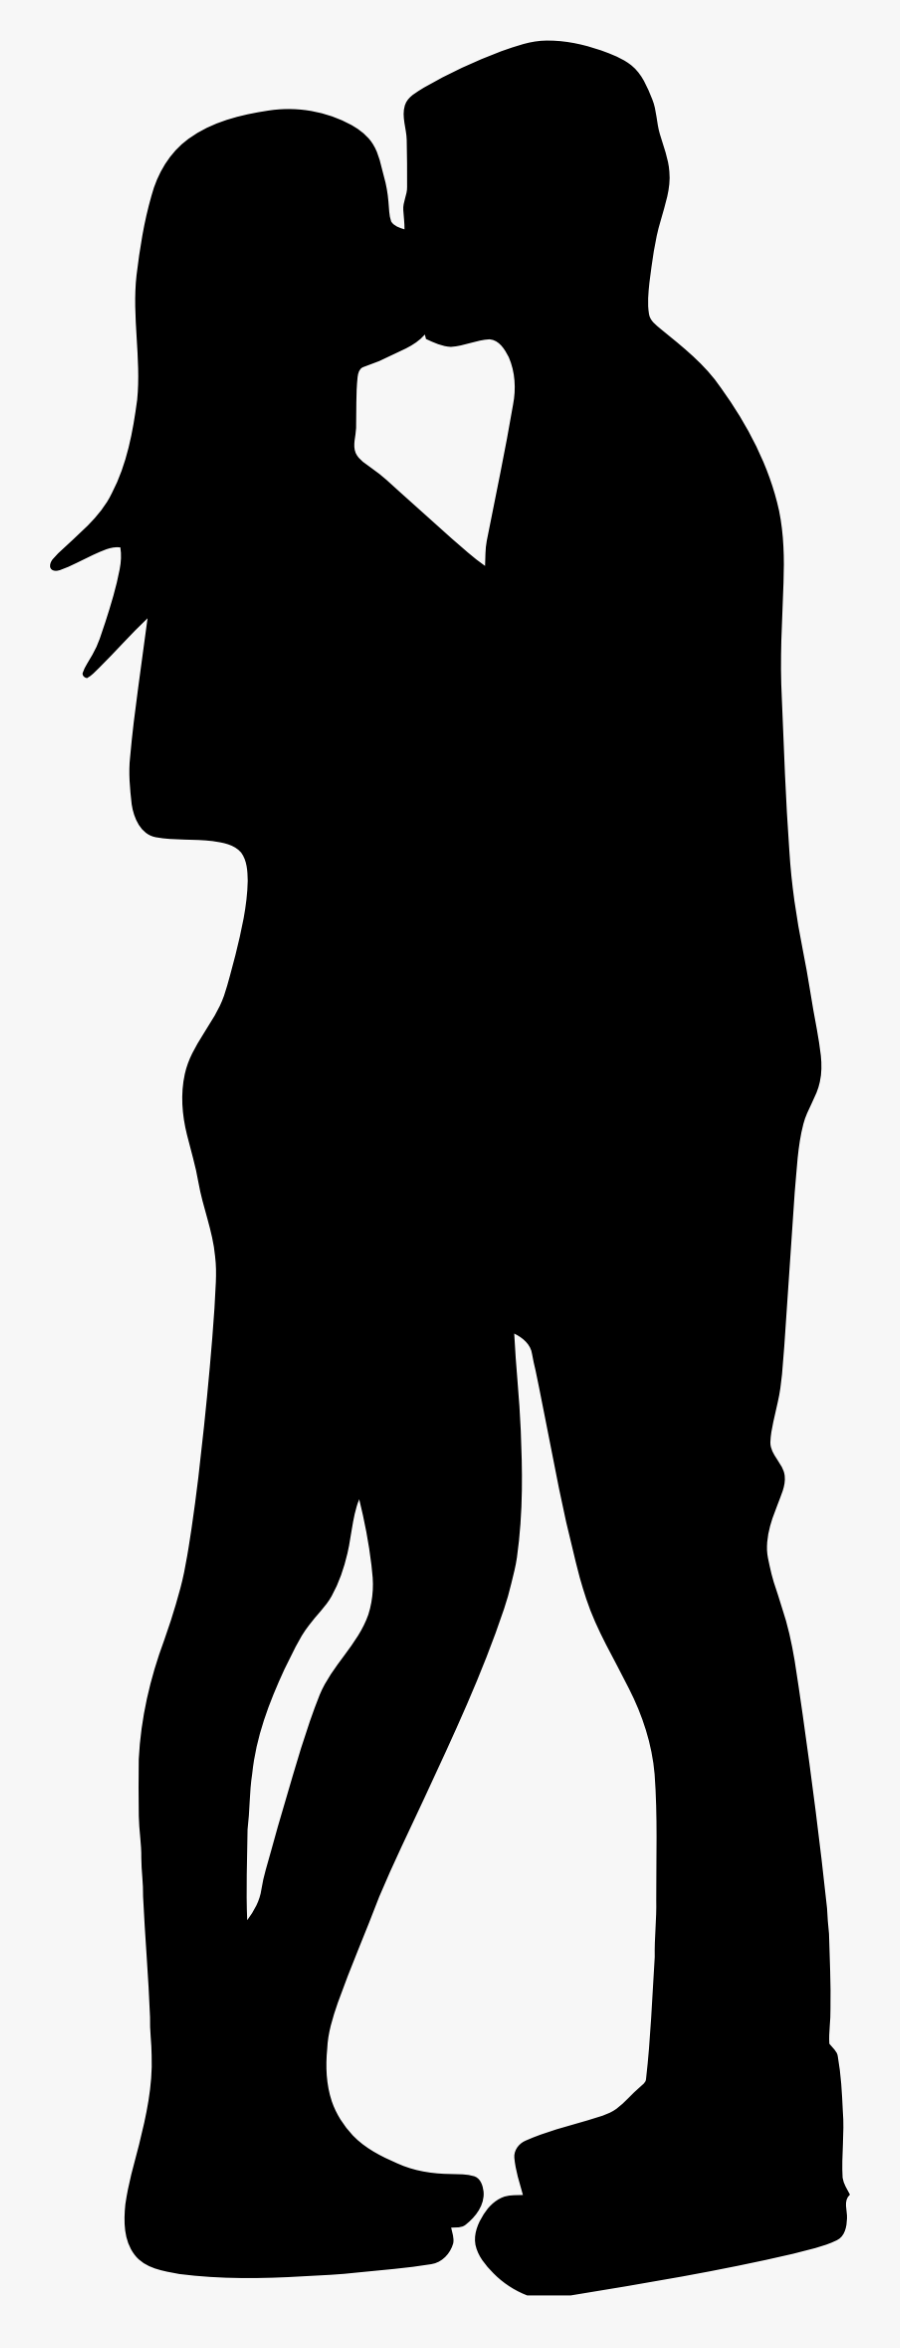 Clipart - Silhouette Of A Couple Kissing, Transparent Clipart